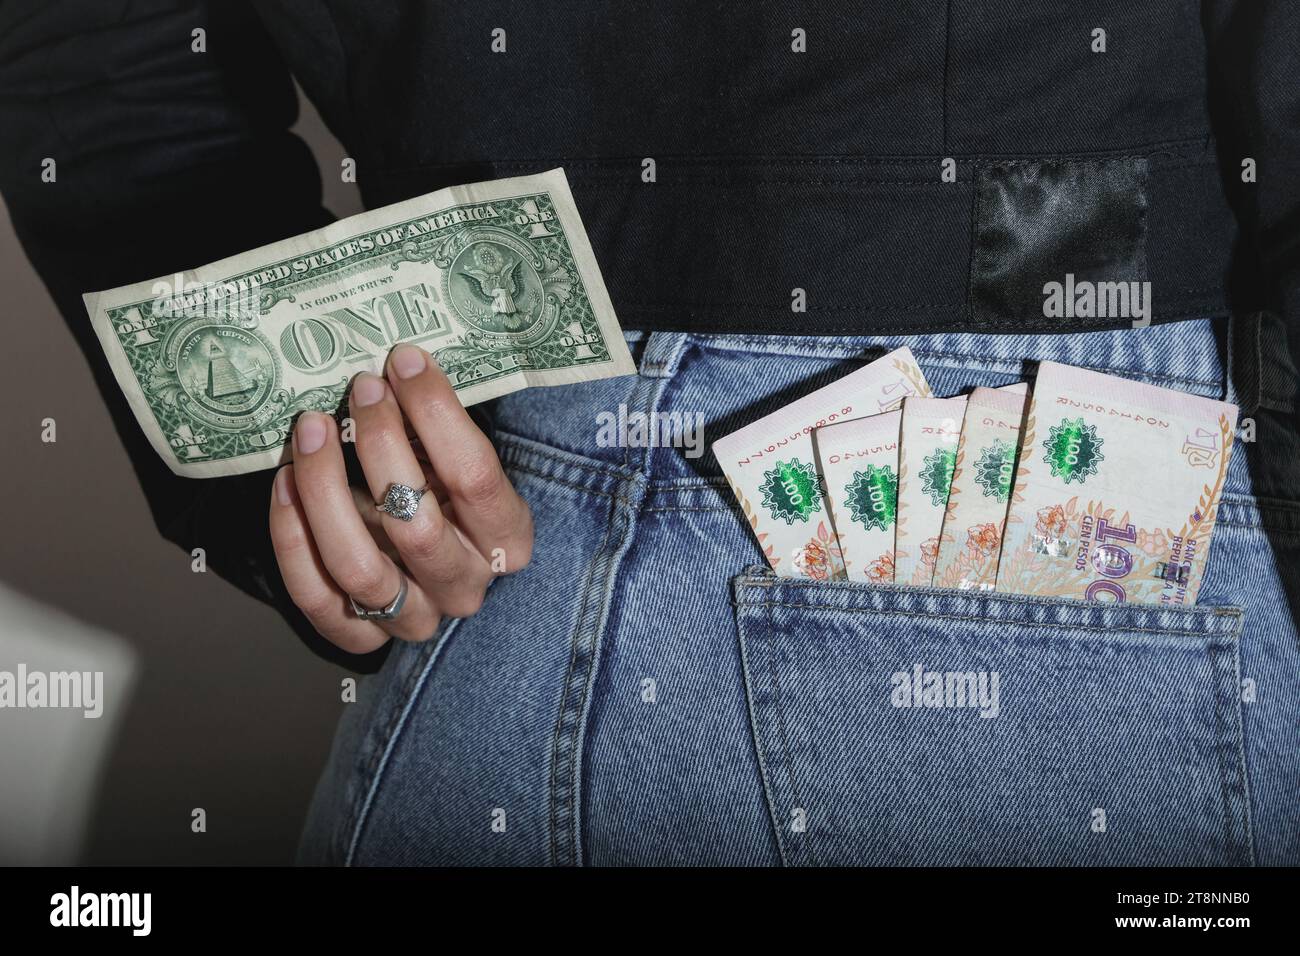 Woman Holding A One Dollar Bill And A Stack Of Argentine Pesos Inside A Jeans Pocket. Financial concept related to inflation and economic crisis. Stock Photo